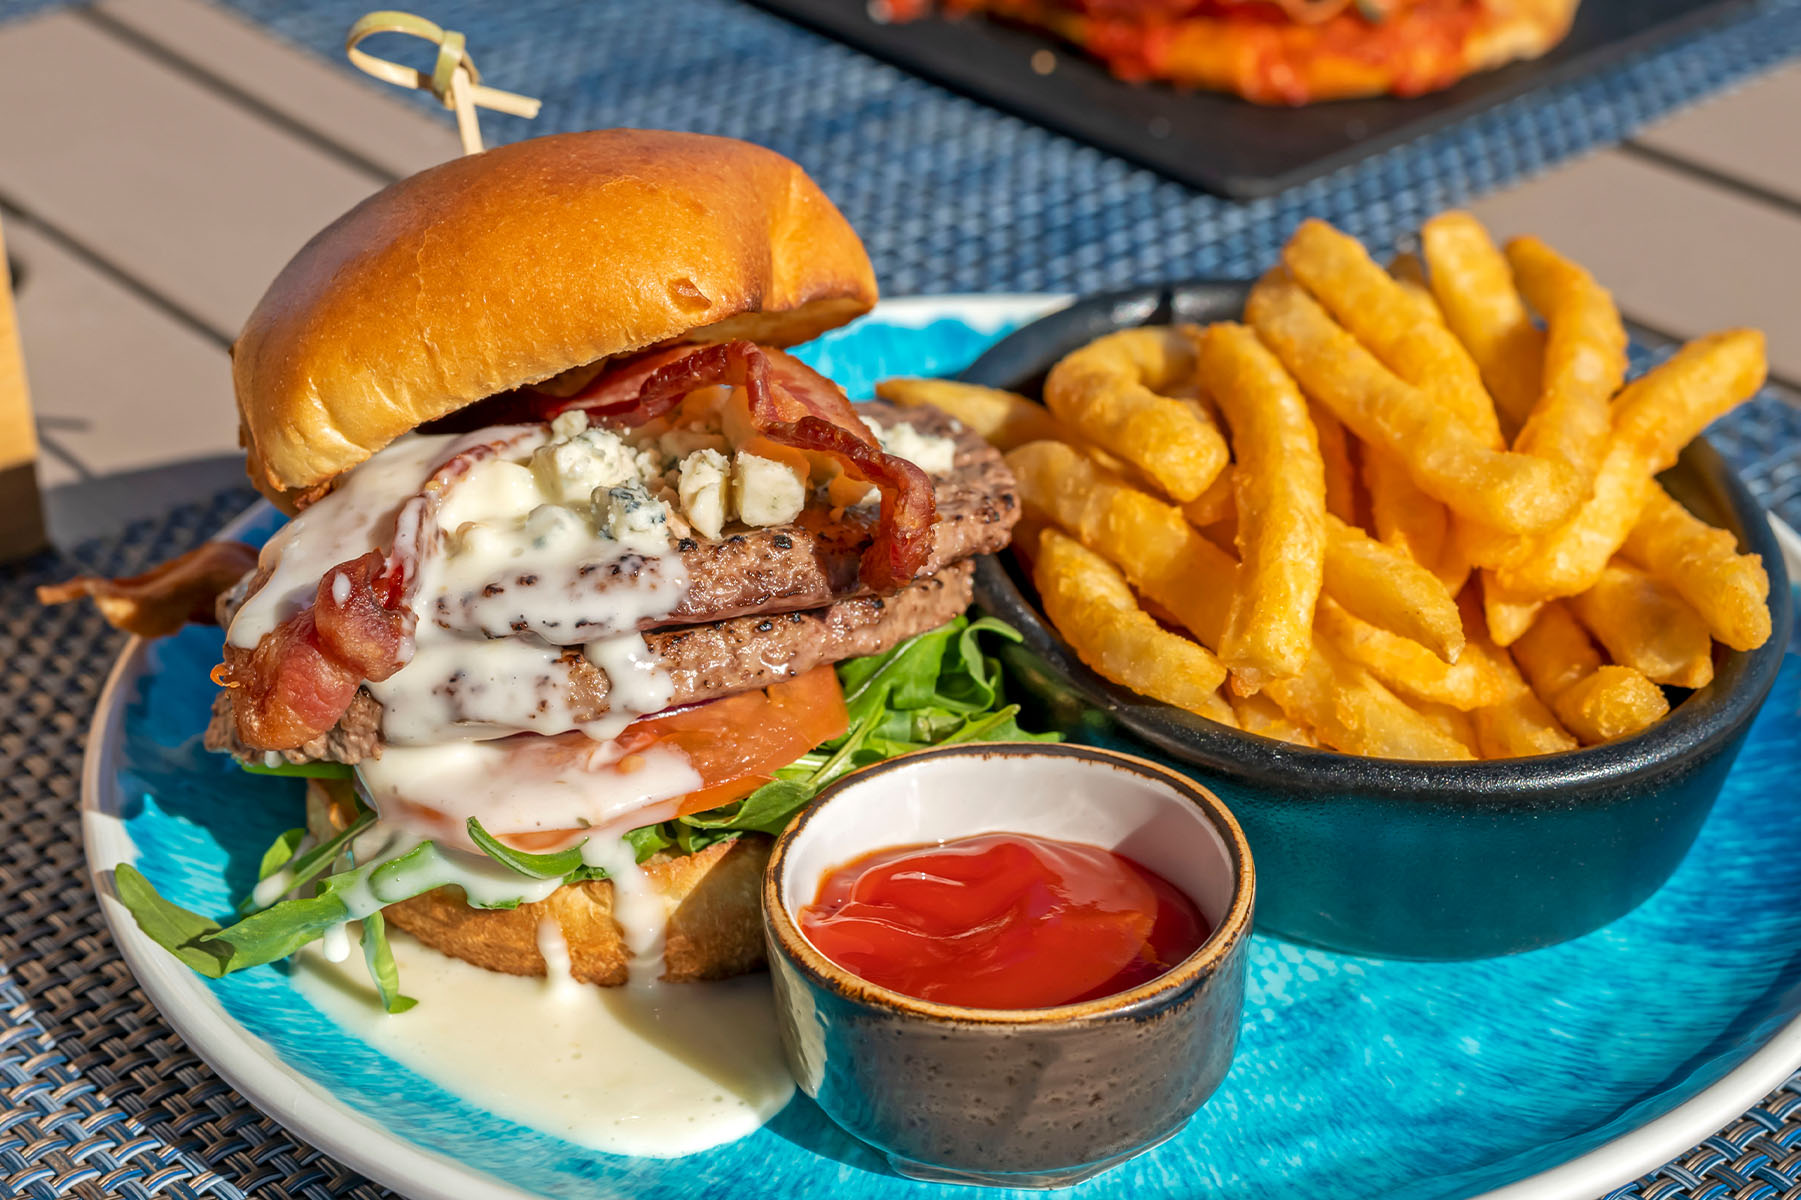 Food photography: A double-burger, a side of ketchup and fries on a blue plate.